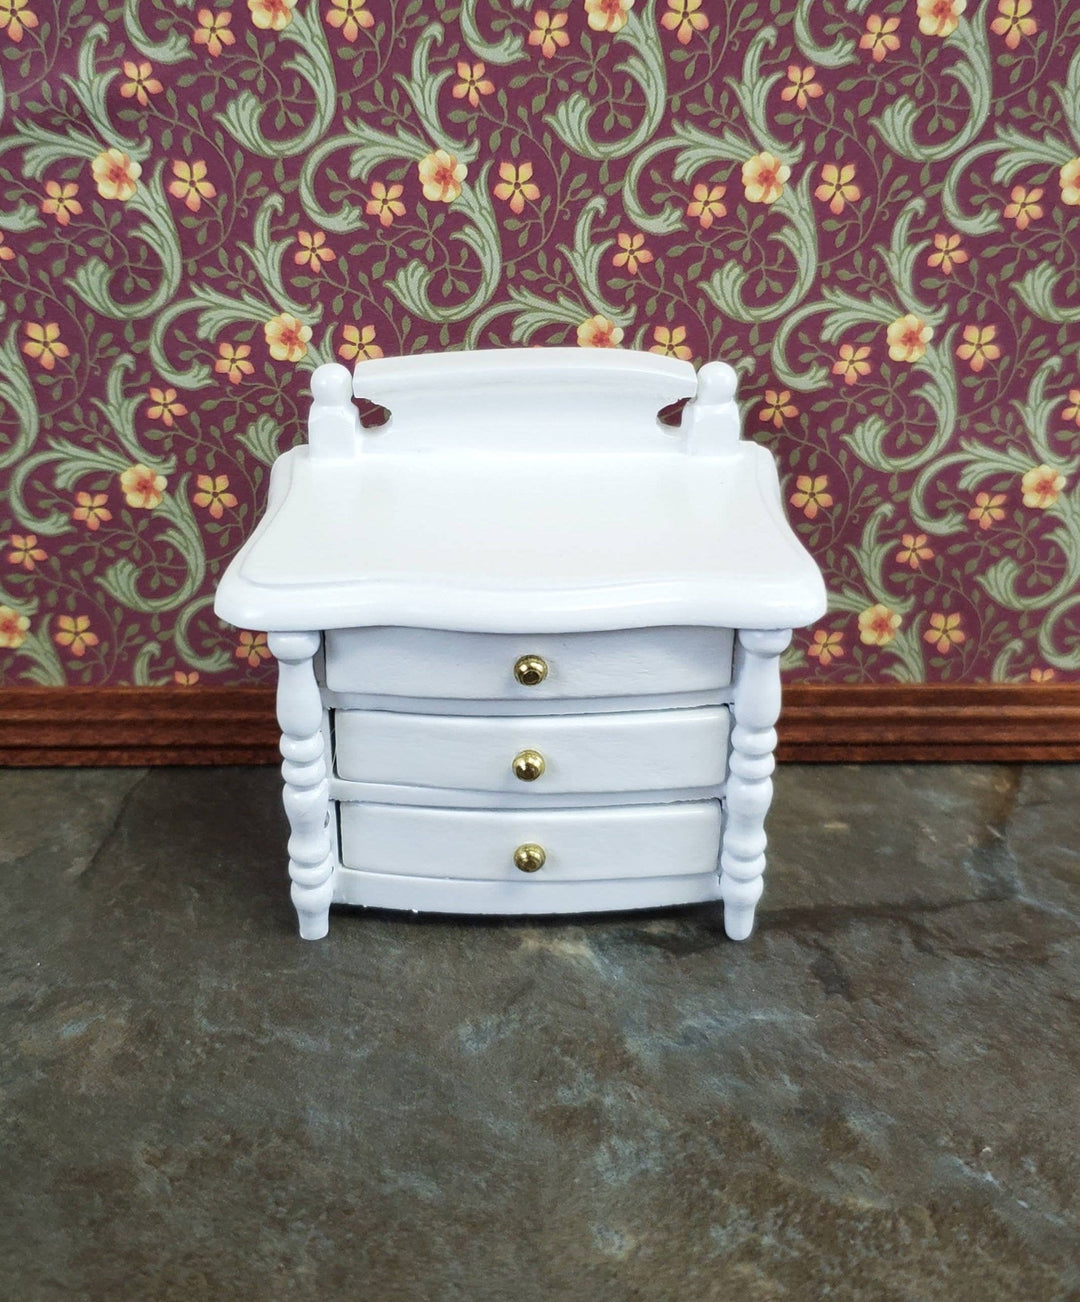 Dollhouse Miniature Night Stand Side Table 3 Drawers 1:12 Scale White Wood - Miniature Crush